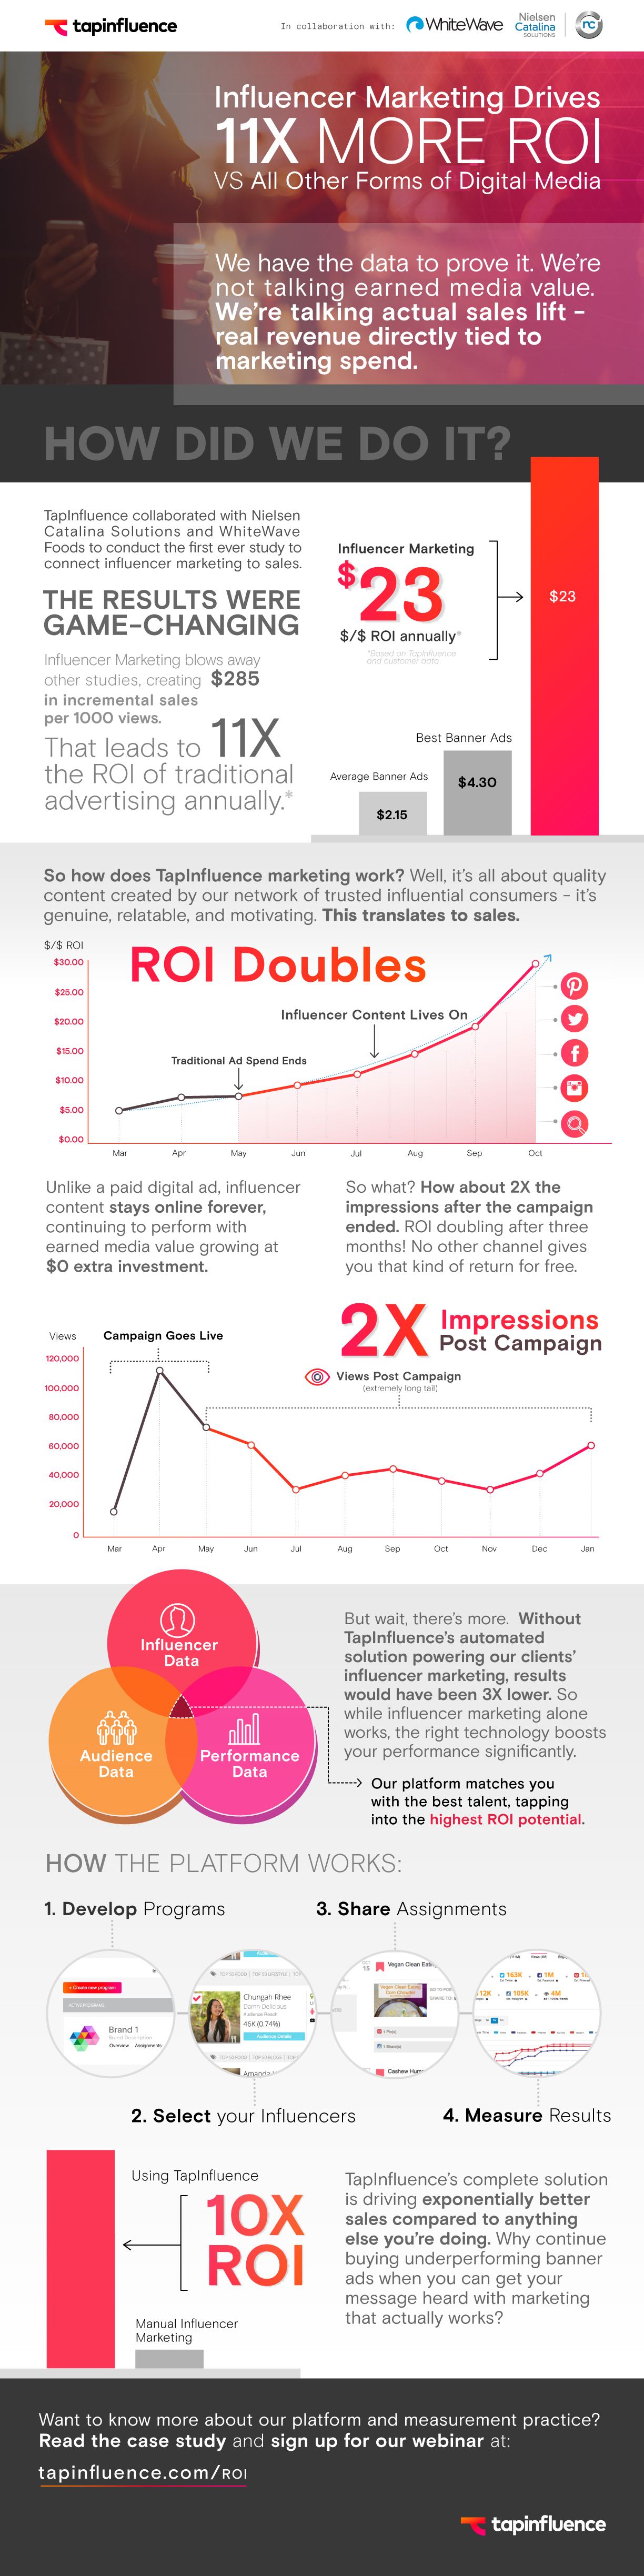 Interesting Infographics: Influencer Marketing Drives 11x more ROI